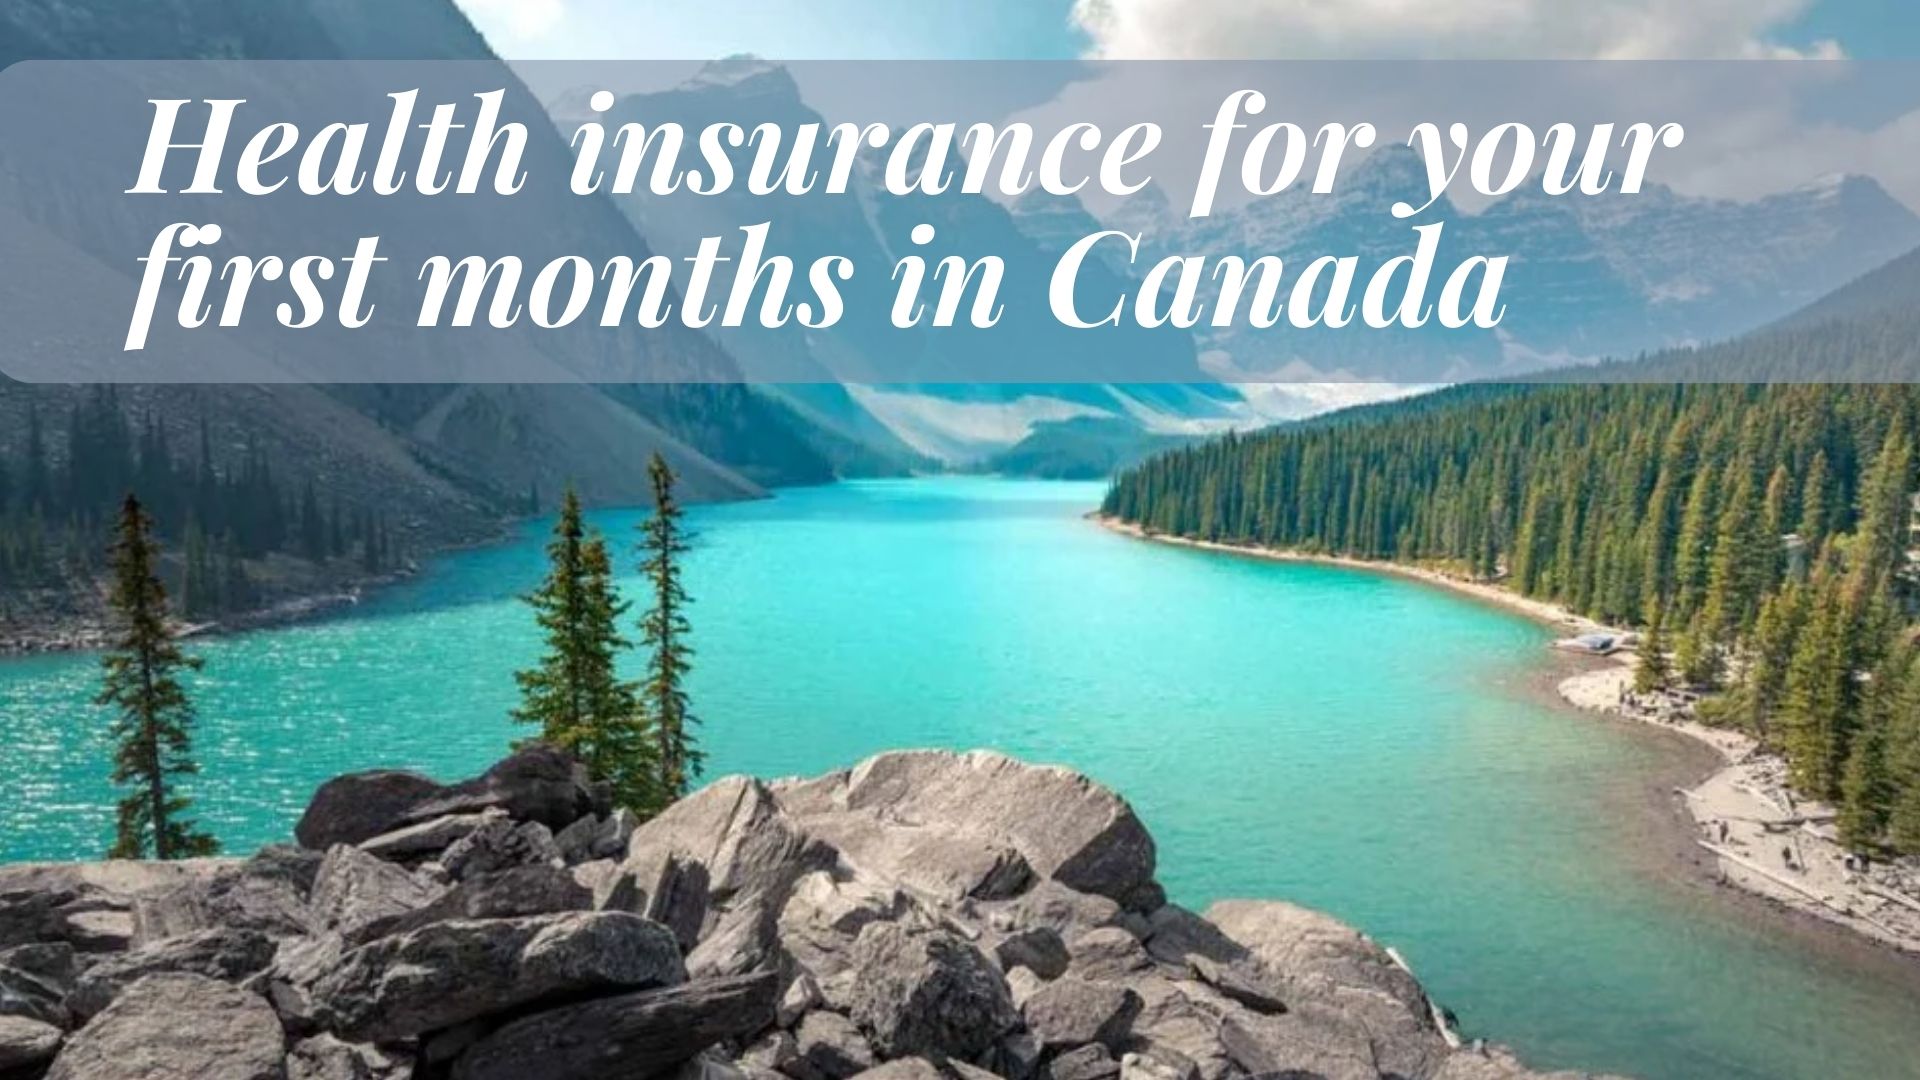 Health insurance for your first months in Canada